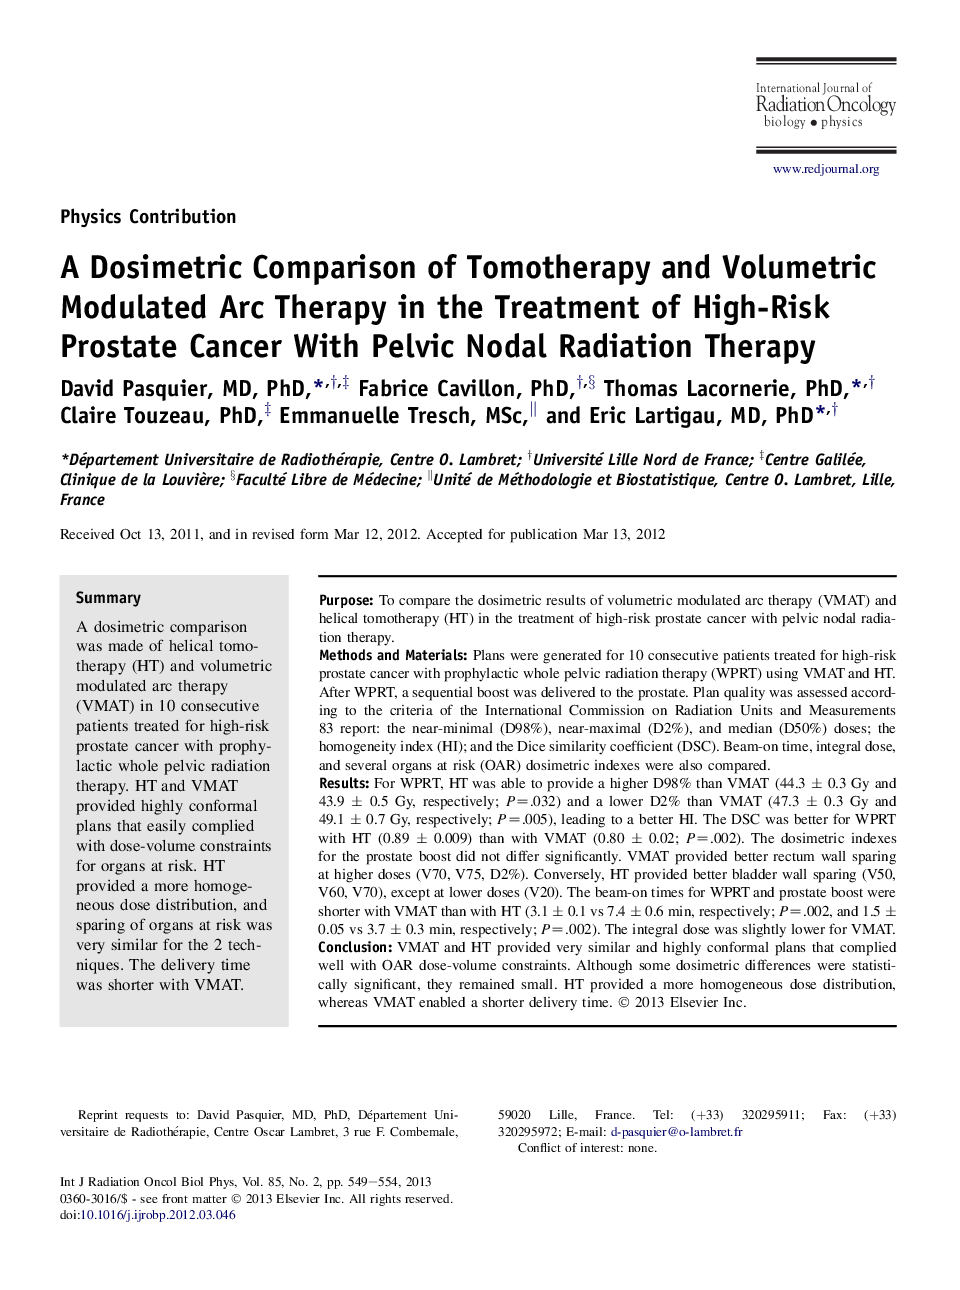 A Dosimetric Comparison of Tomotherapy and Volumetric Modulated Arc Therapy in the Treatment of High-Risk Prostate Cancer With Pelvic Nodal Radiation Therapy